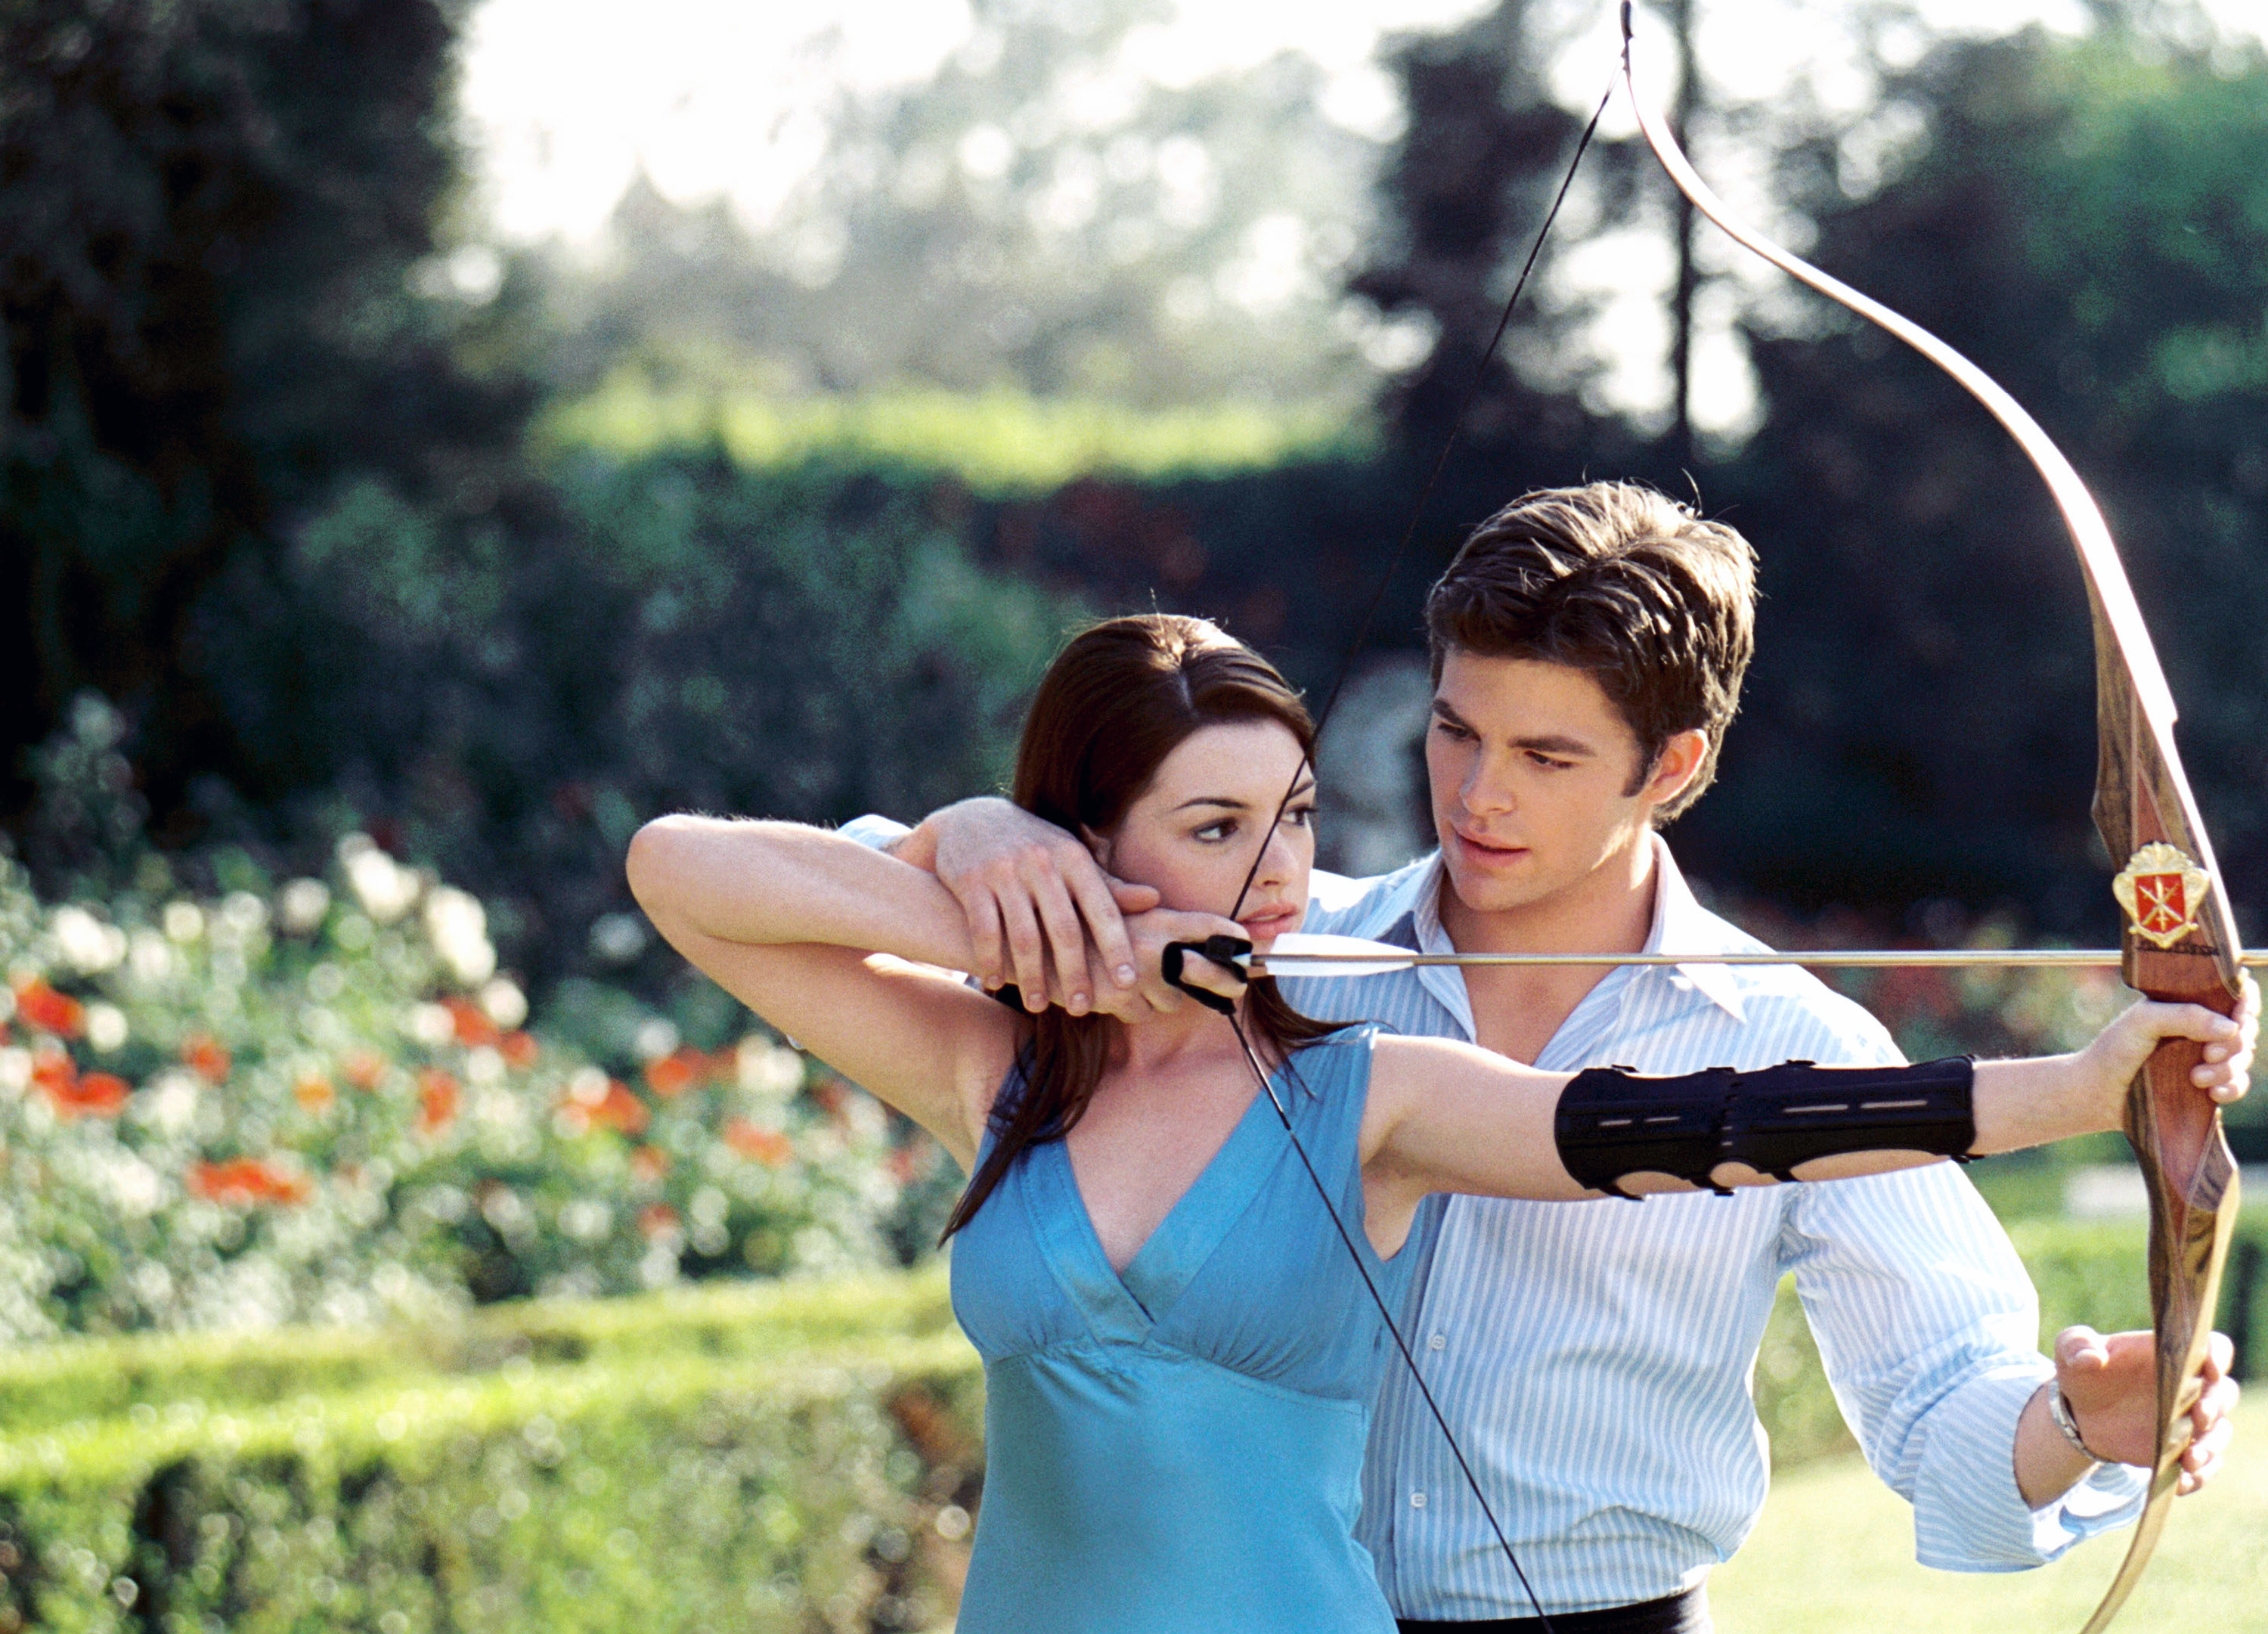 Chris Pine helps Anne Hathaway with archery in The Princess Diaries 2: Royal Engagement.